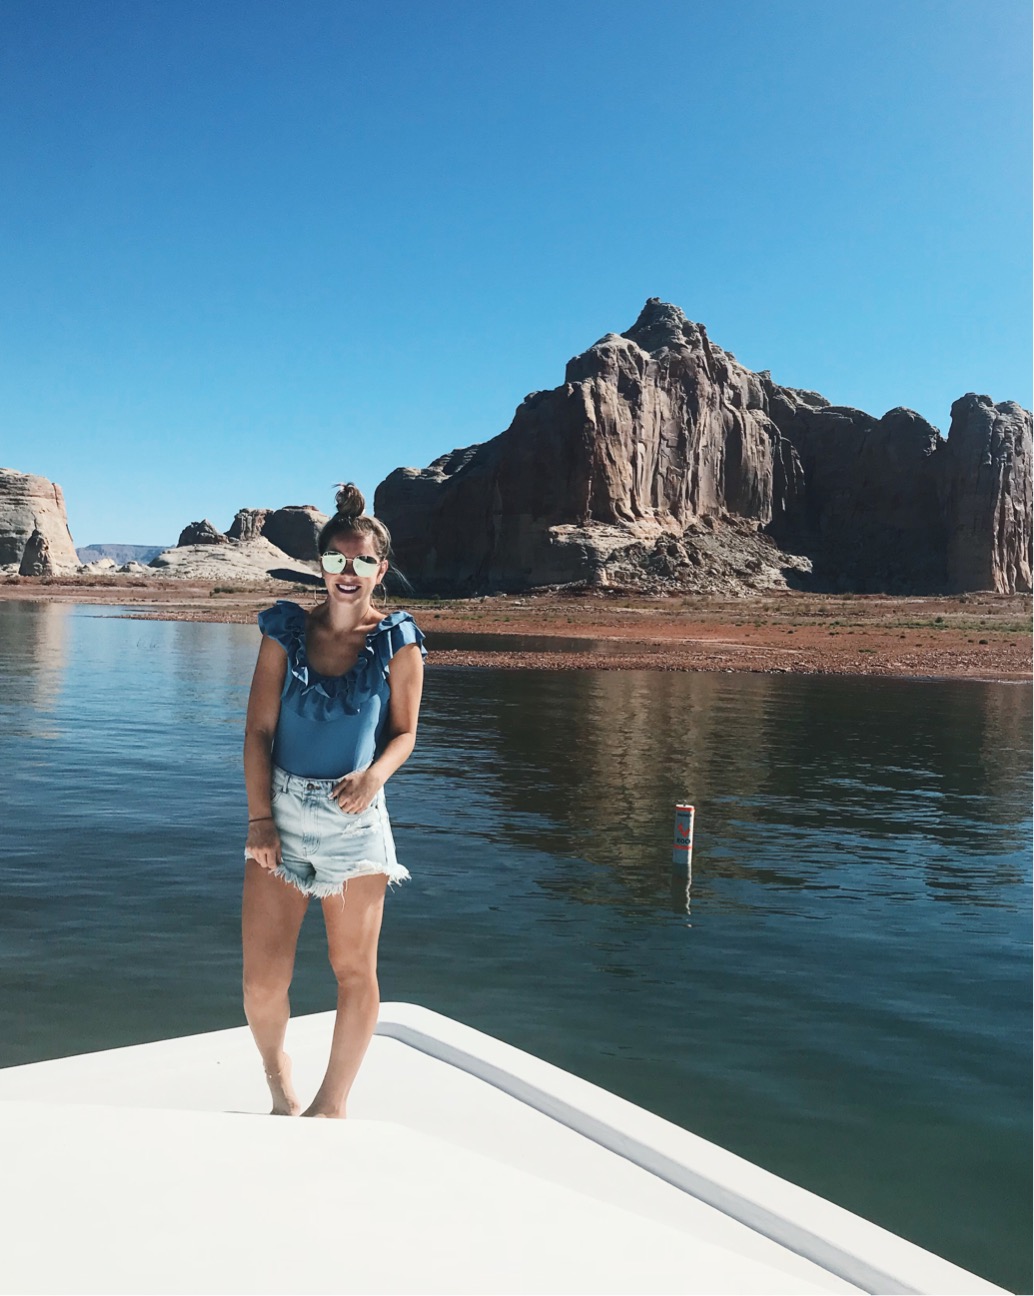 A Fantastic Lake Powell Vacation featured by popular Las Vegas travel bloggers, Life of a Sister